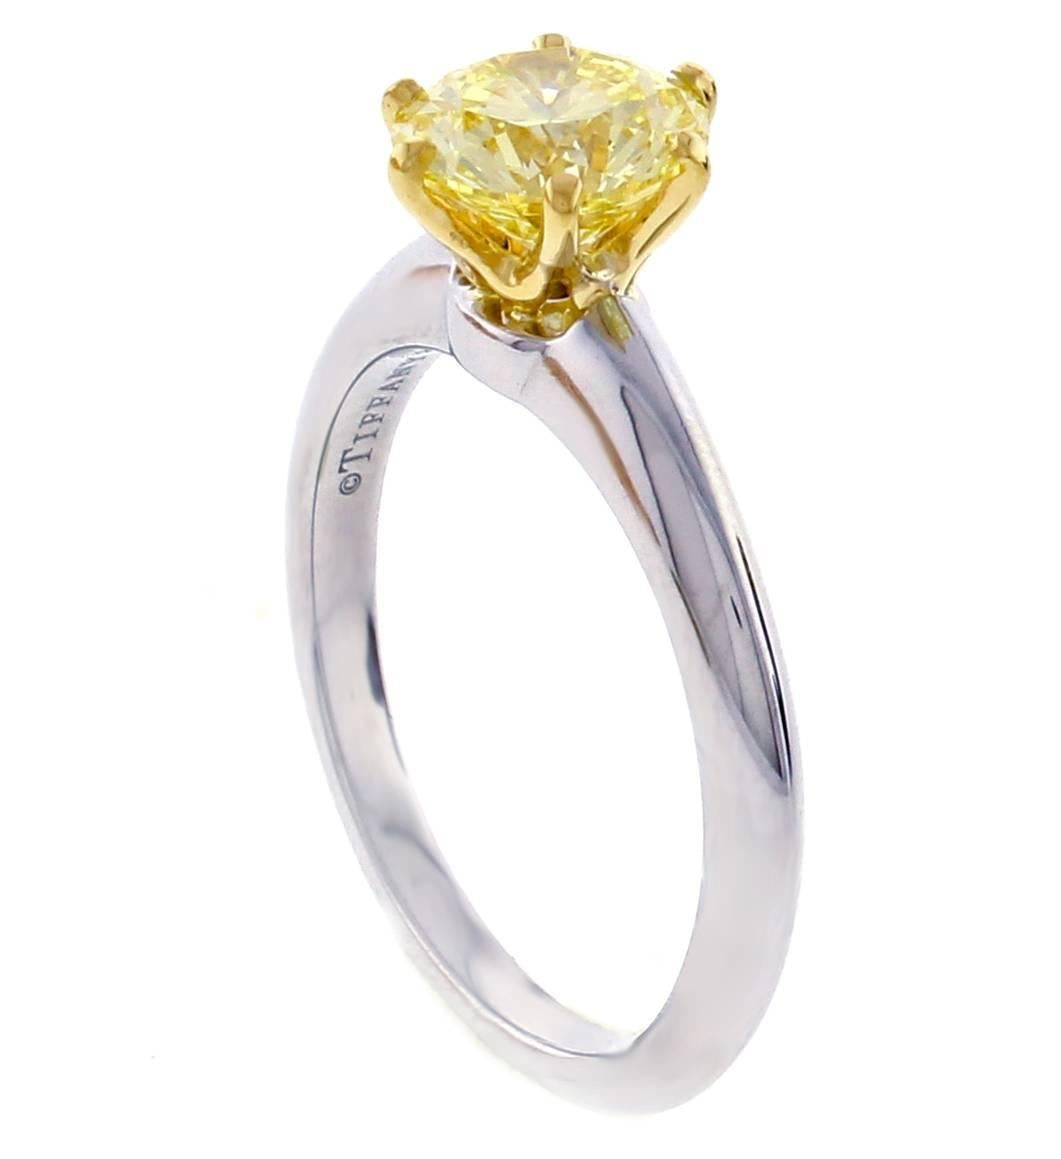 From Tiffany & Co., the world’s most iconic engagement ring.  The brilliant fanny yellow diamond shines like the sun in this platinum and 18 karat setting. Diamond weighs 1.44,  FY color and VS1 clarity. Size 6   GIA report